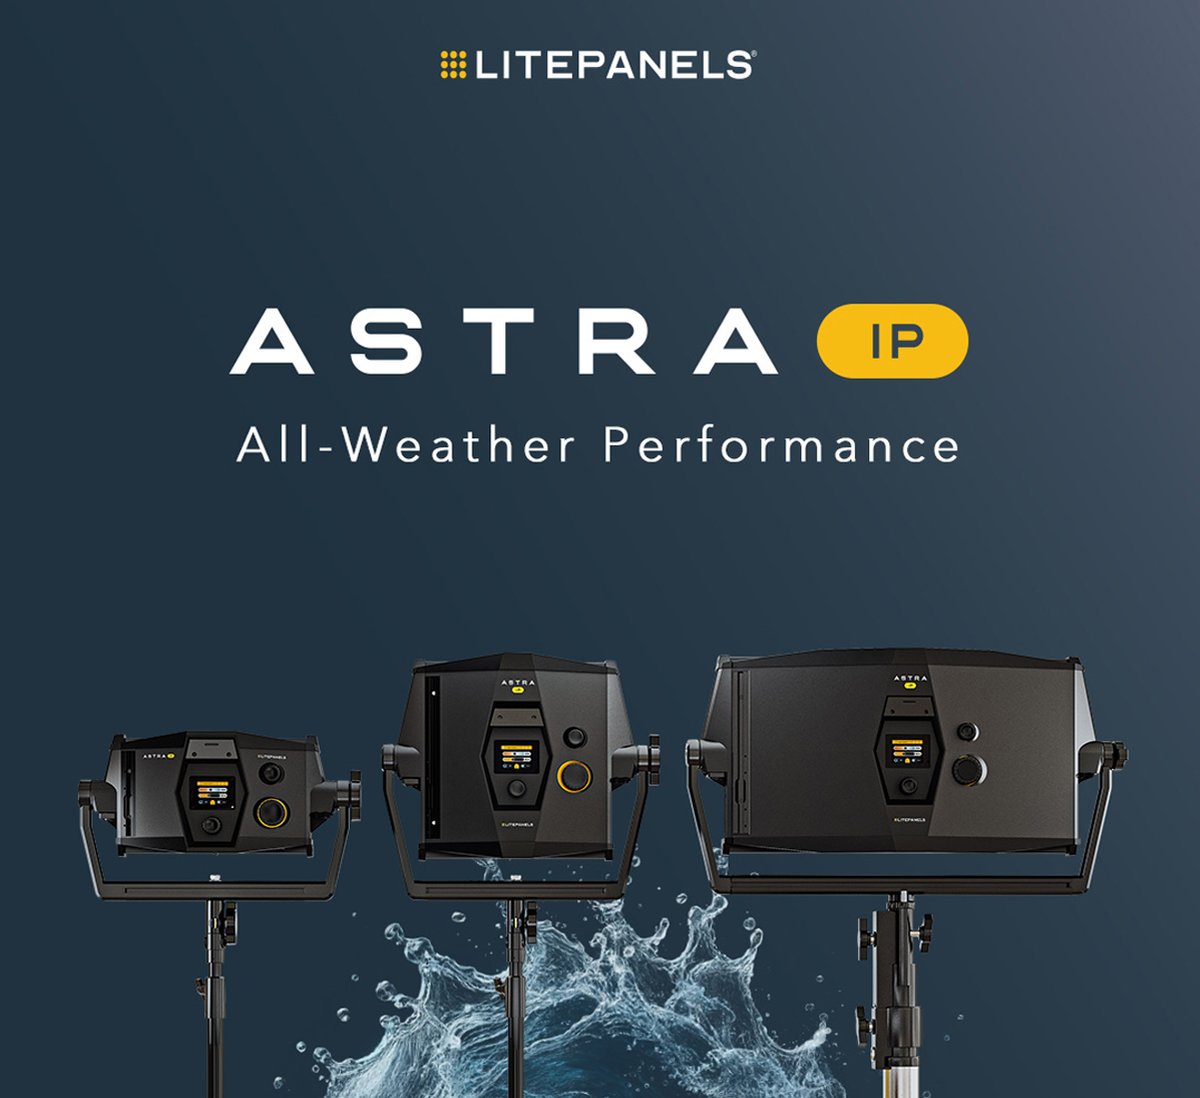 Introducing the Litepanels Astra IP range! 💡 Equipped with ultra-efficient LEDs and a tighter beam angle, Astra IP provides flattering and accurate white light from 2,700K to 6,500K at any intensity level. Explore the whole range 👇 bit.ly/4arMm0u